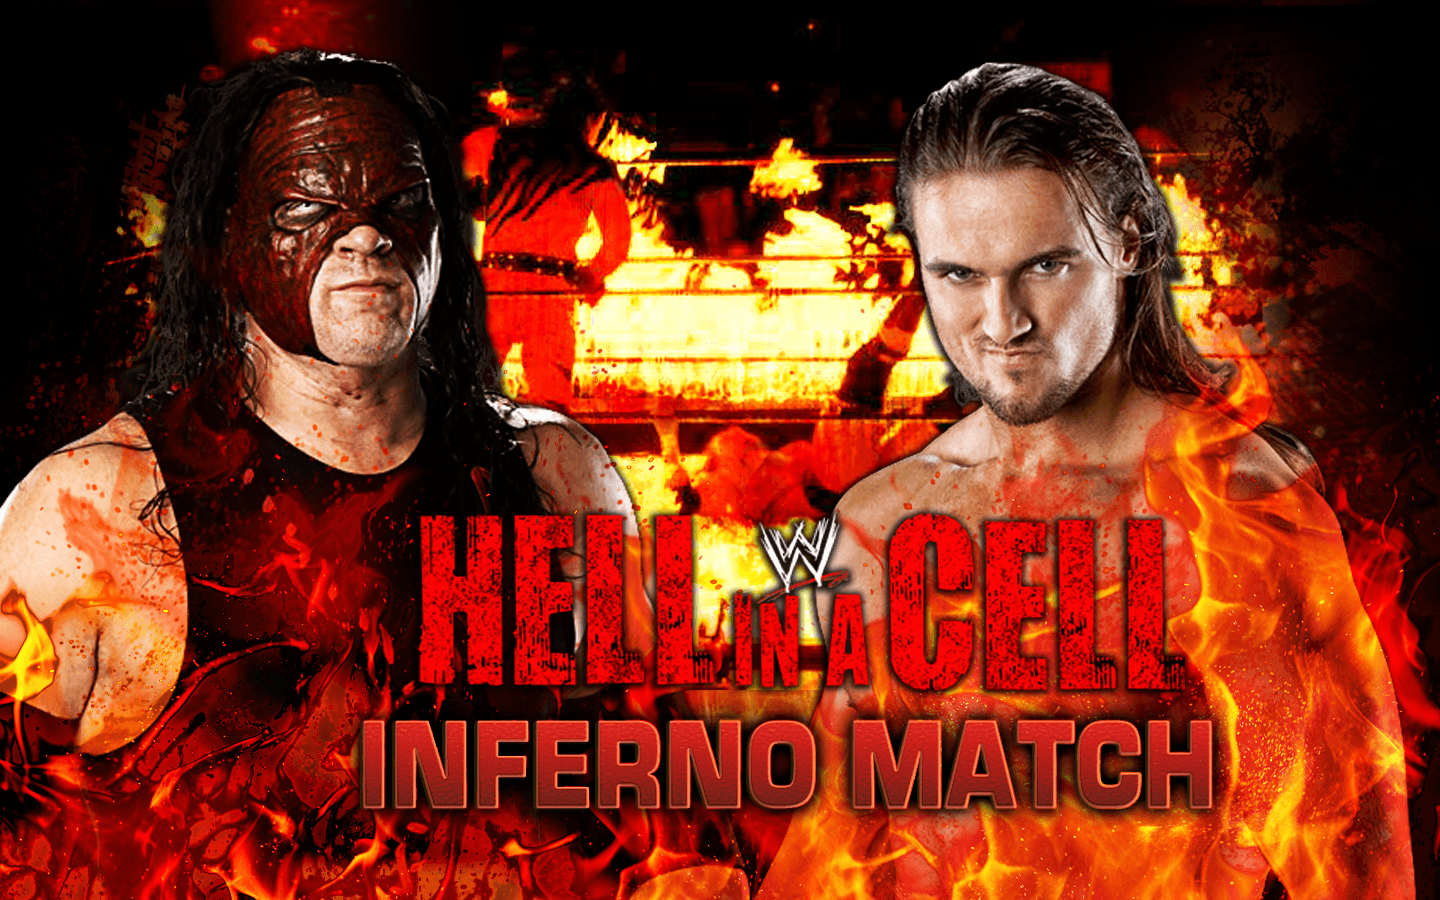 WWE Hell In A Cell 2013 wallpaper, Movie, HQ WWE Hell In A Cell